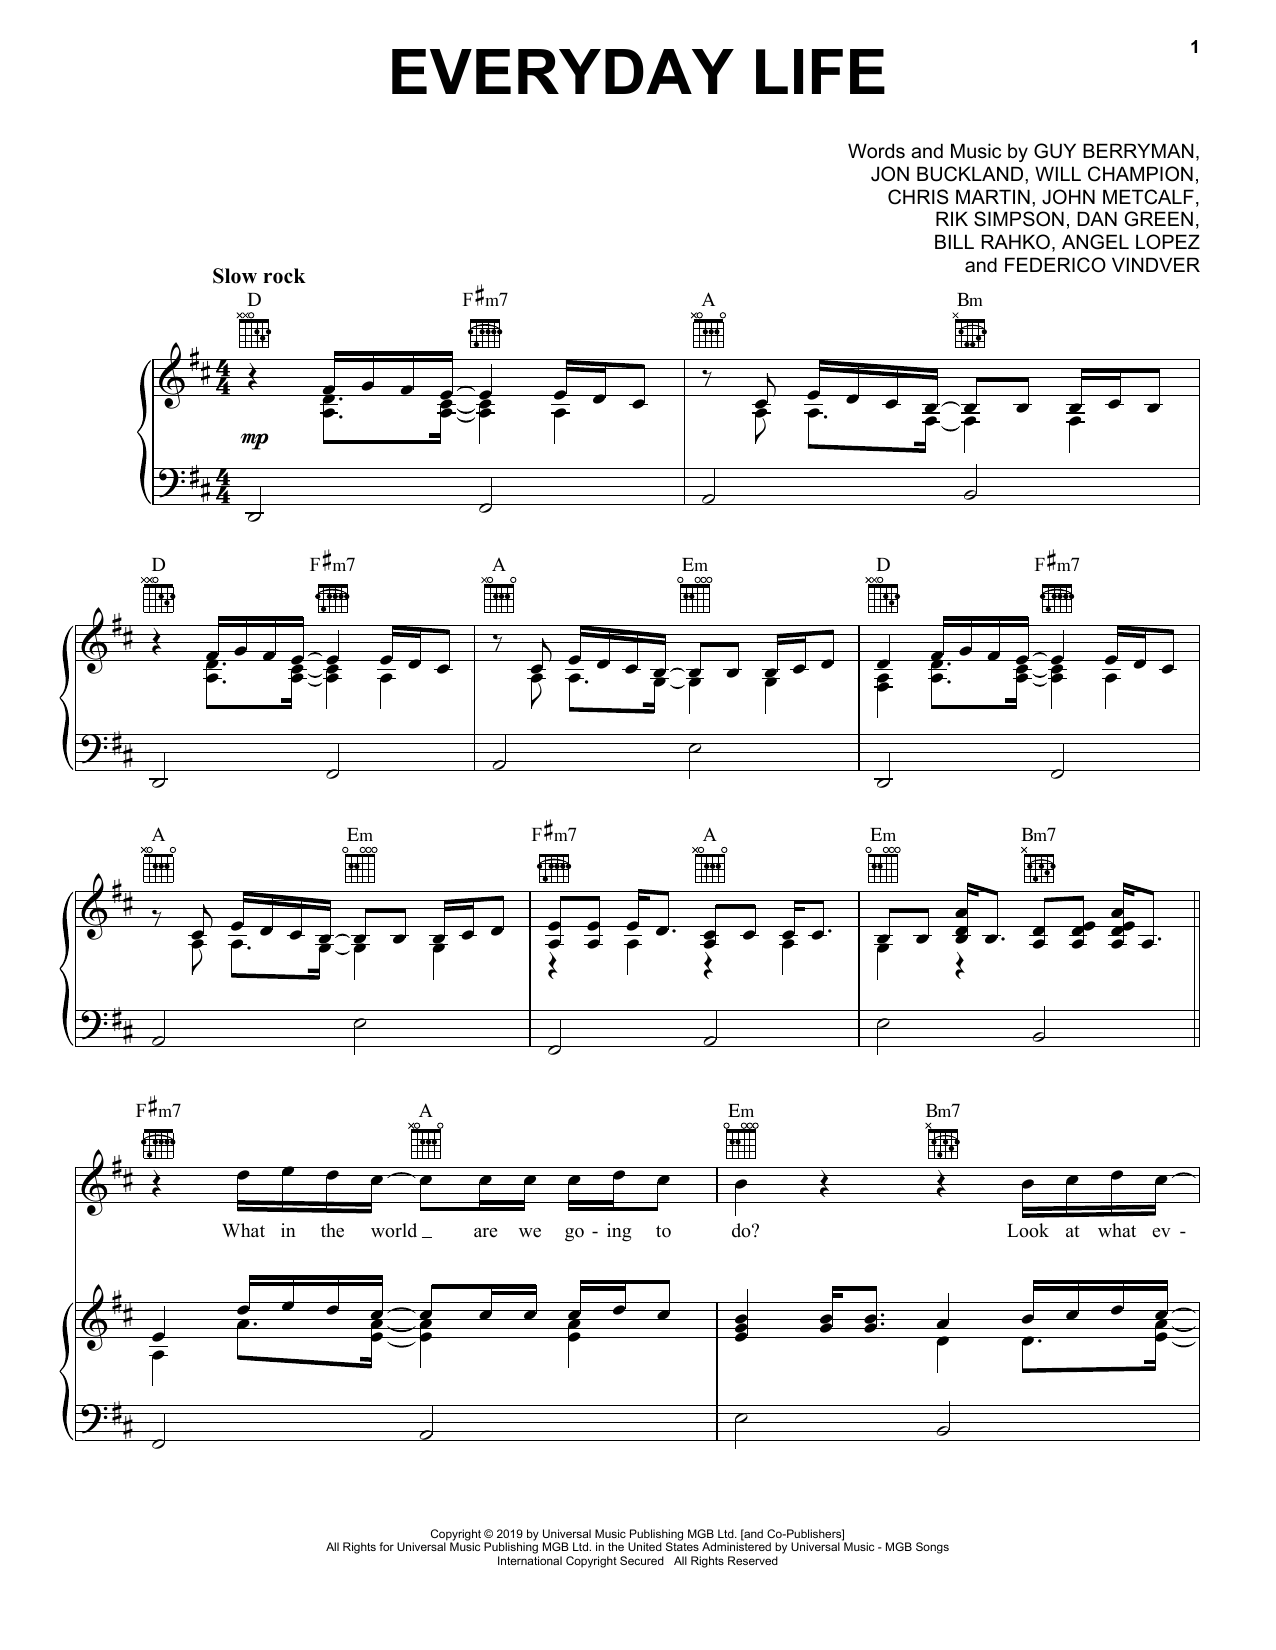 Coldplay "Everyday Life" Sheet Music PDF Notes, Chords | Alternative